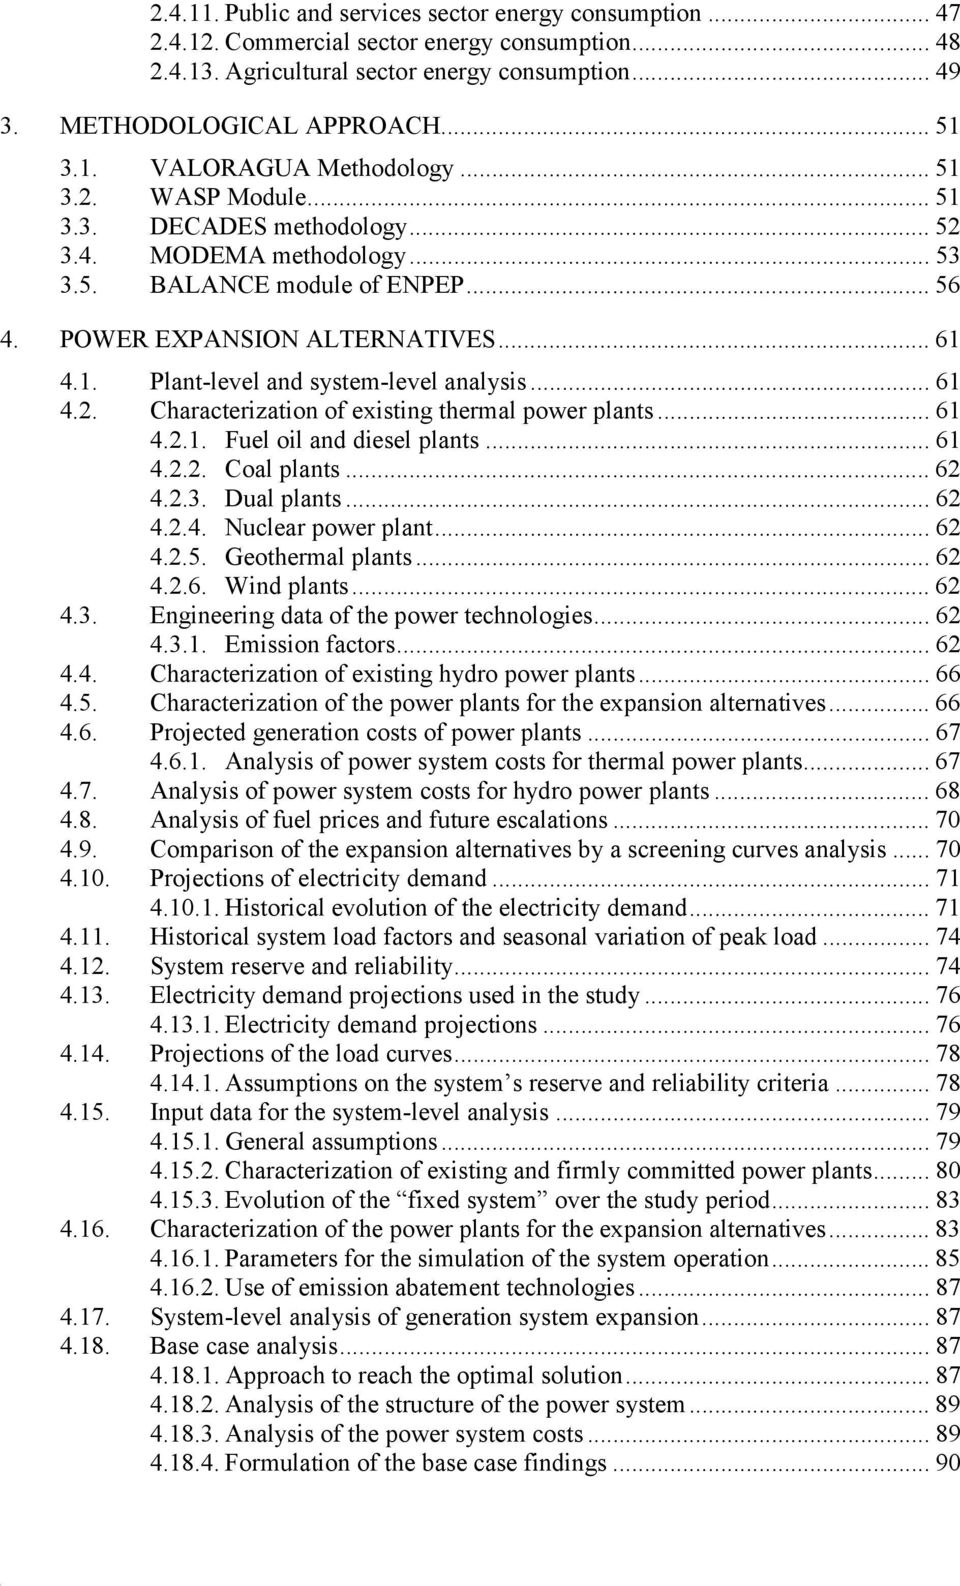 .. 61 4.2. Characterization of existing thermal power plants... 61 4.2.1. Fuel oil and diesel plants... 61 4.2.2. Coal plants... 62 4.2.3. Dual plants... 62 4.2.4. Nuclear power plant... 62 4.2.5.